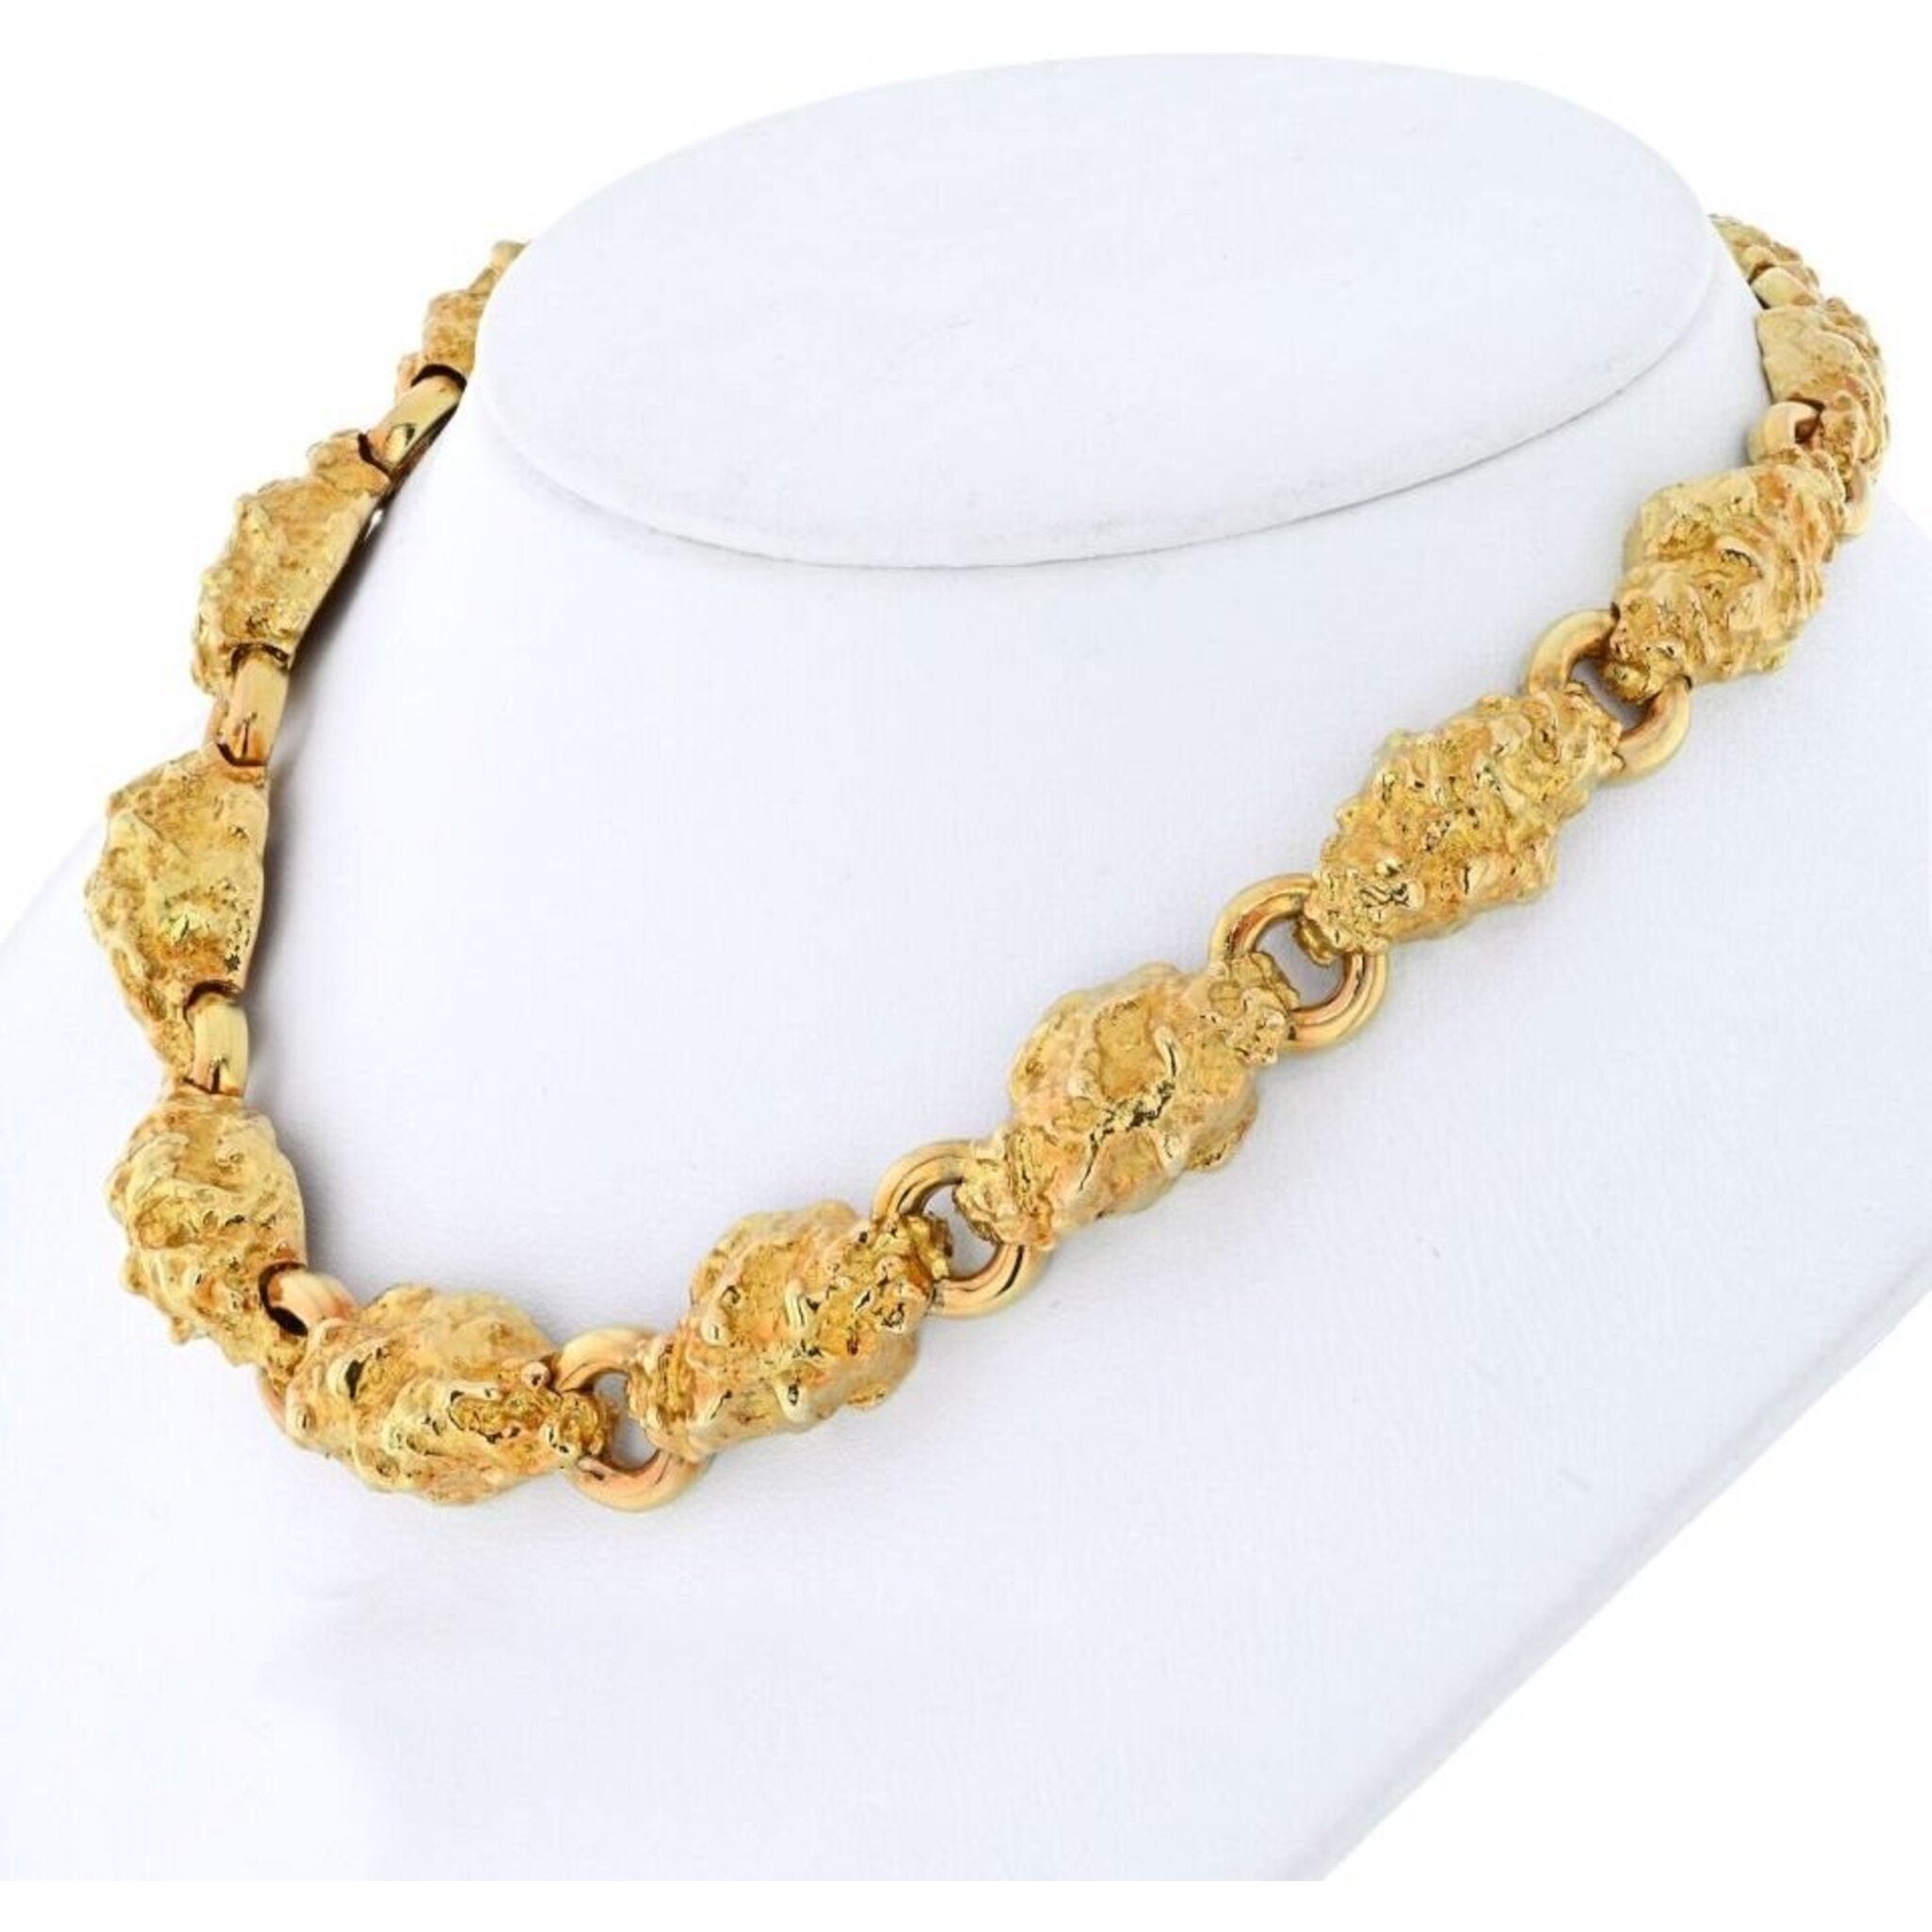 Amazon.com: The Bling Factory 7.5mm 14k Yellow Gold Plated Flat Nugget  Chain Necklace, 30 inches: Thug Fashion Jewelry: Clothing, Shoes & Jewelry